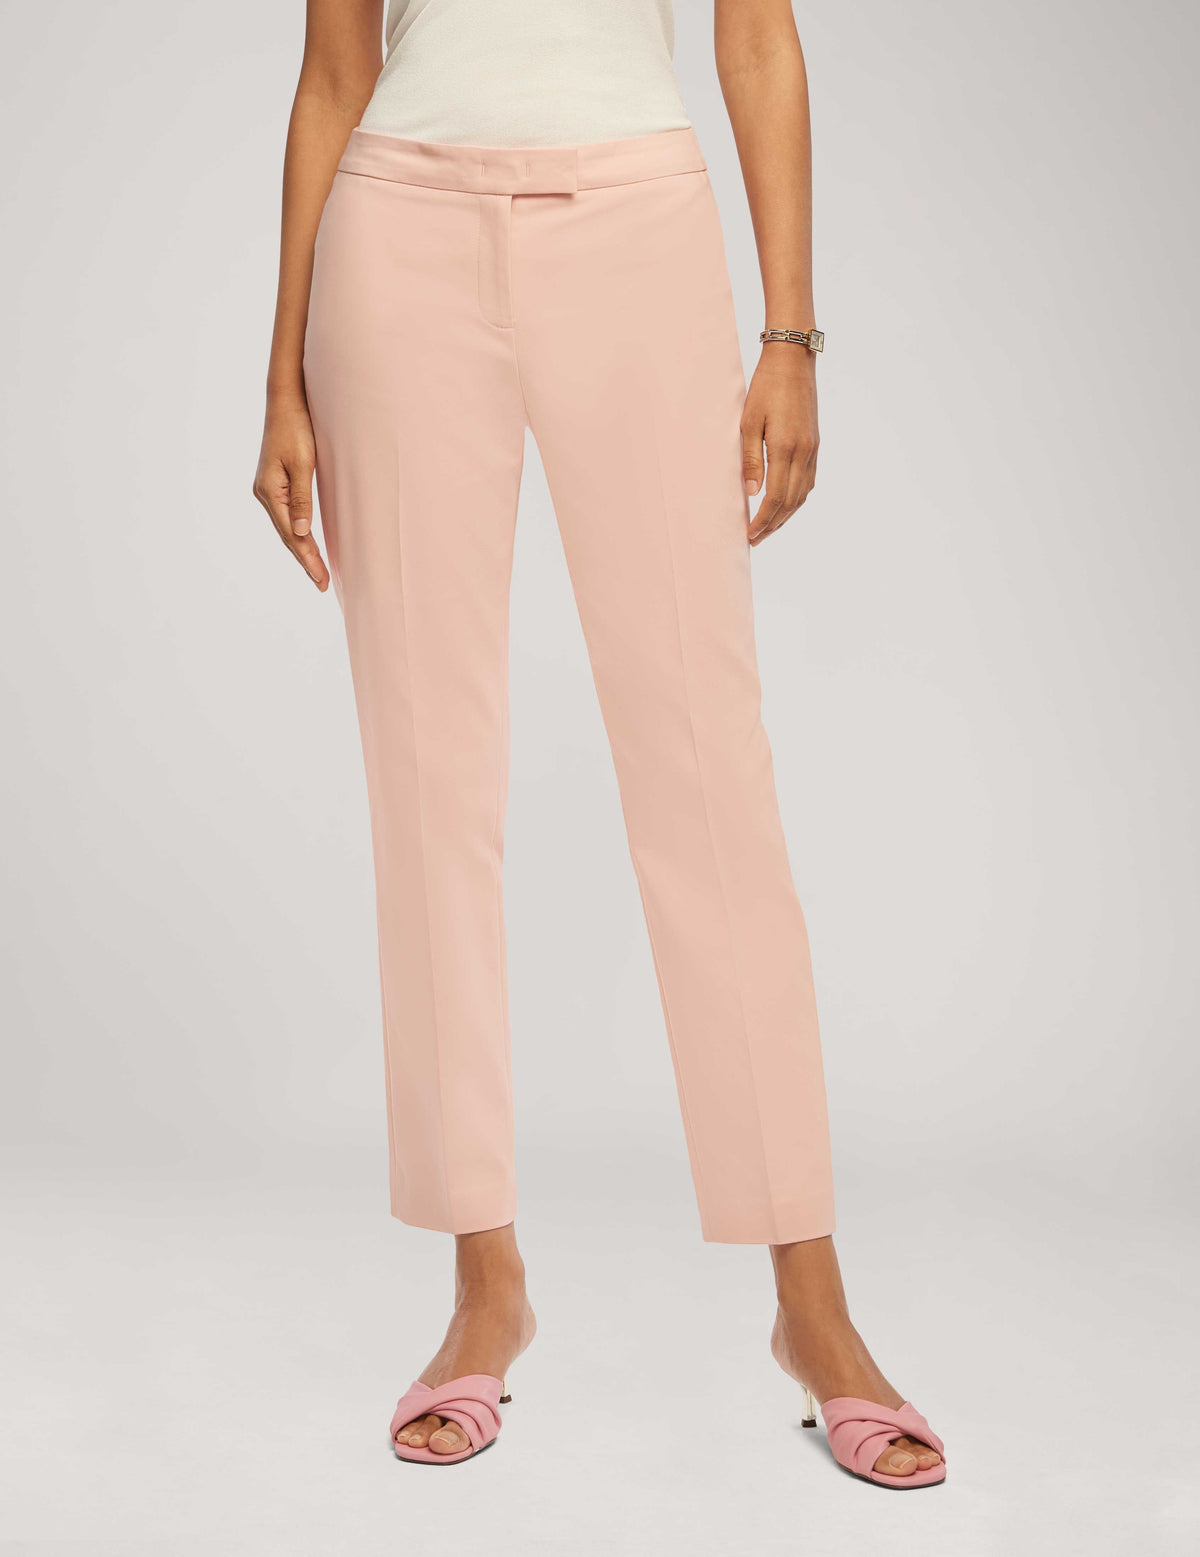 Anne Klein Cherry Blossom Cotton Double Weave Bowie Pant- Clearance